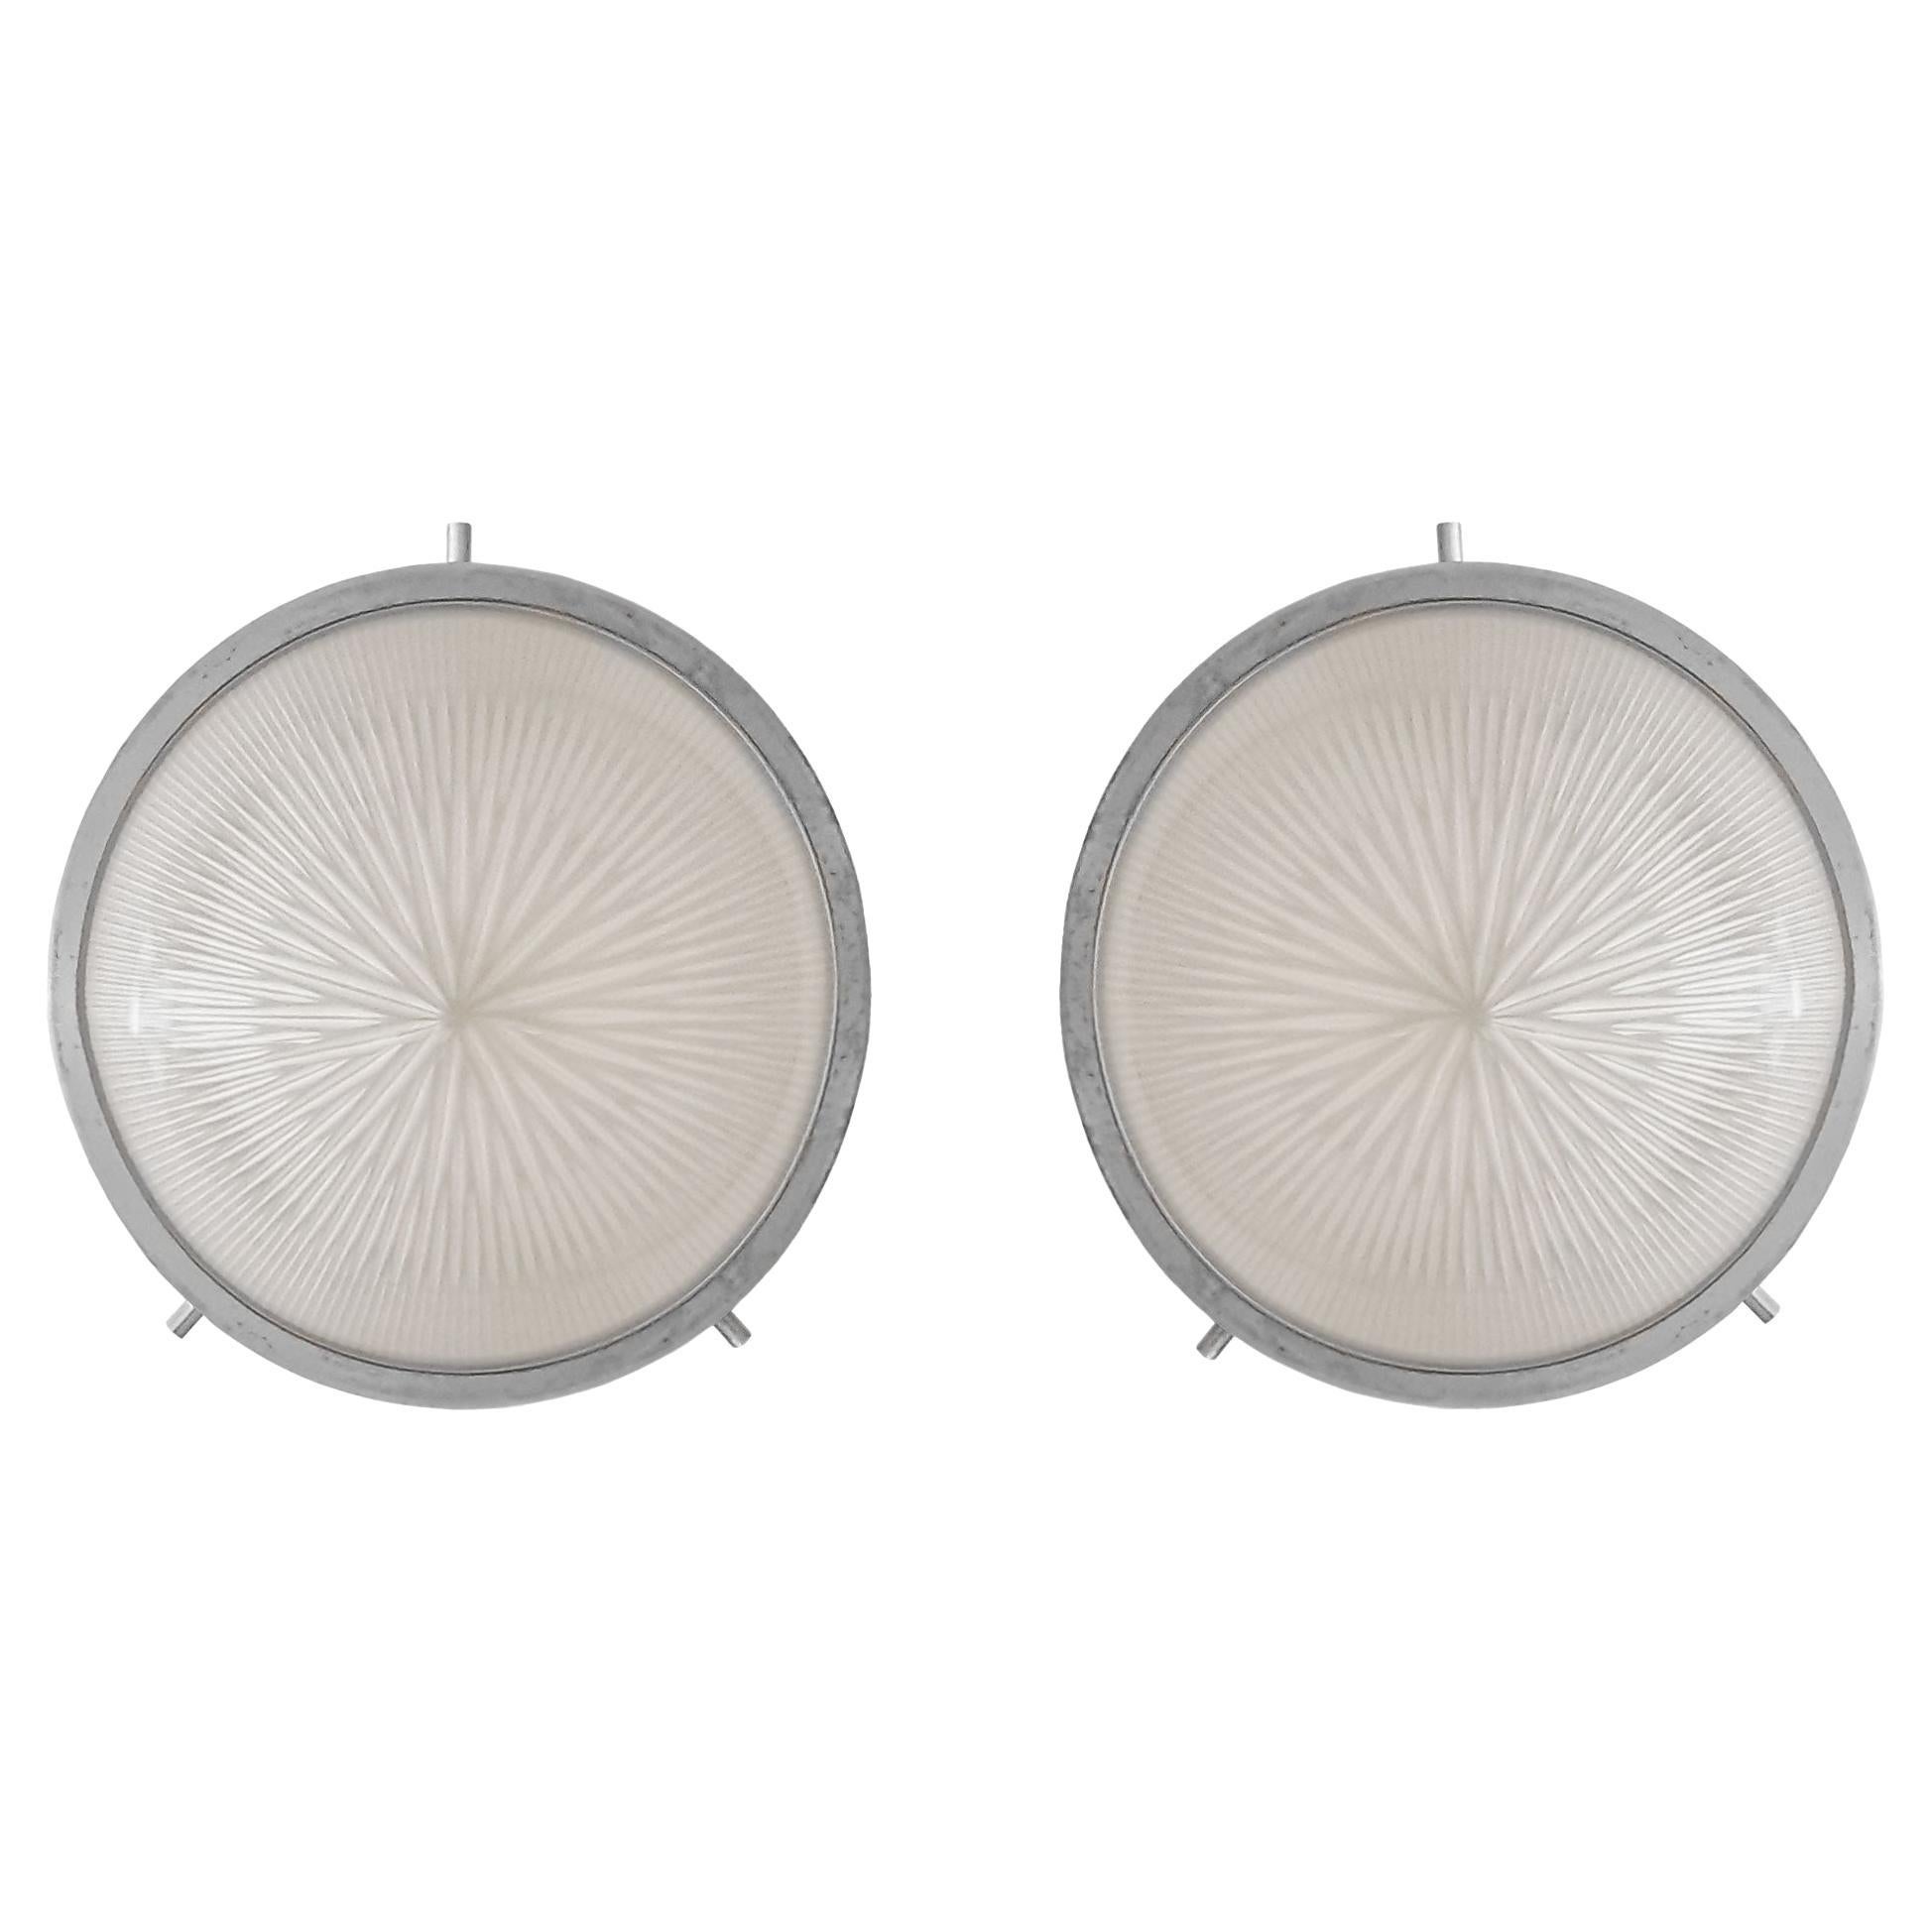 Mid-Century Modern Pair of Sergio Mazza's Sigma Sconces for Artemide - Italy For Sale